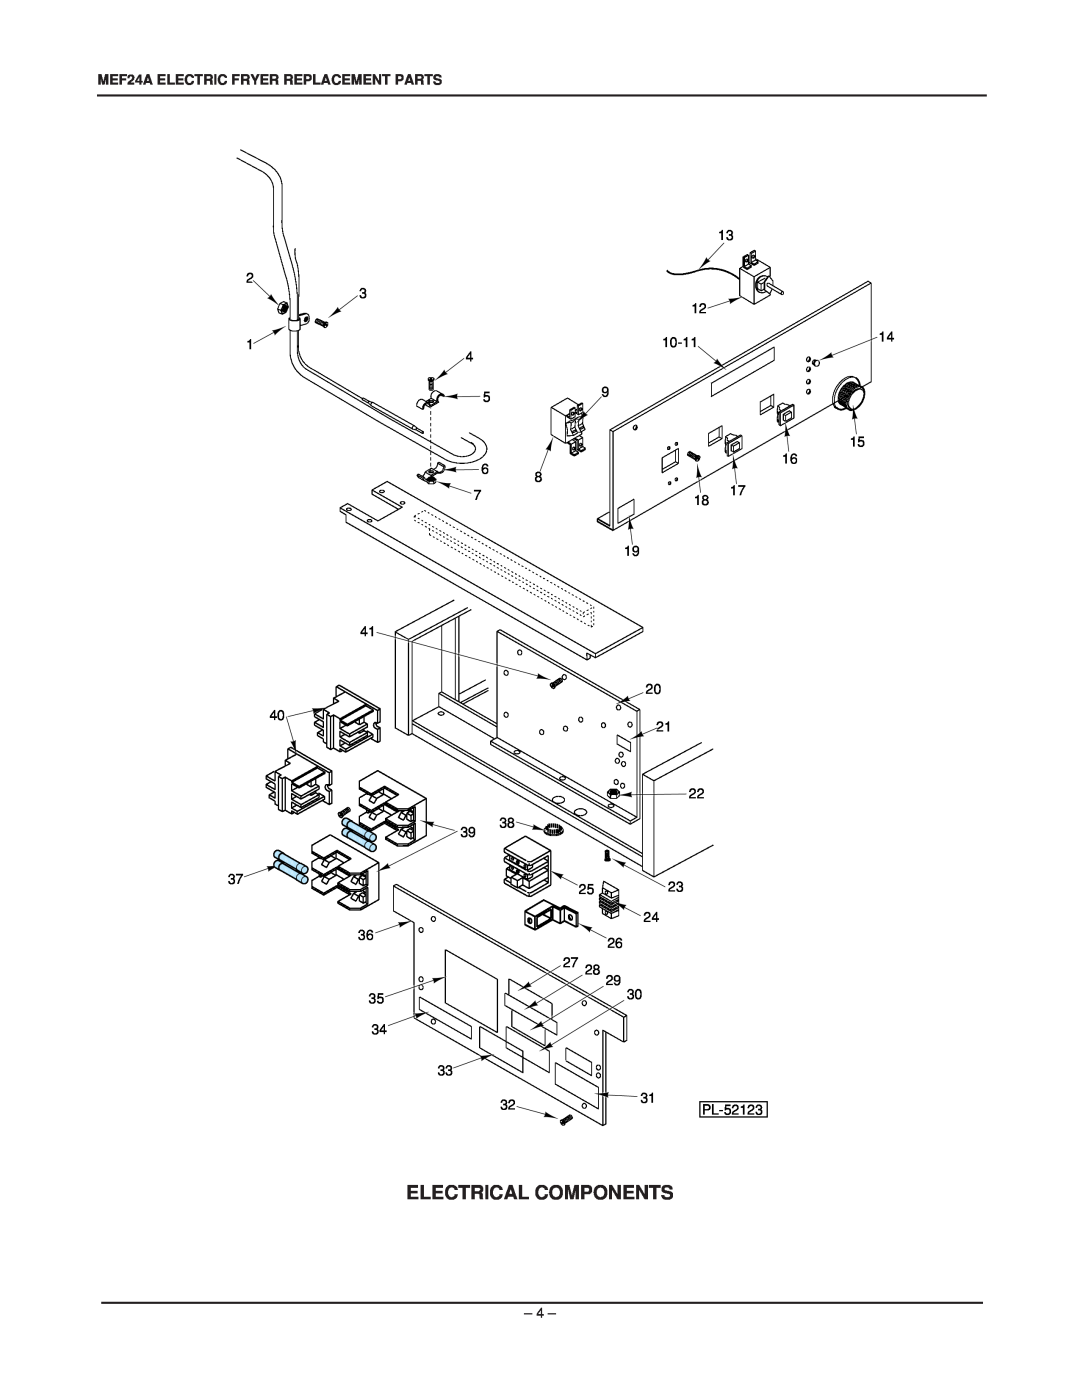 Vulcan-Hart ML-52837, ML-52836 service manual Electrical Components, MEF24A ELECTRIC FRYER REPLACEMENT PARTS 